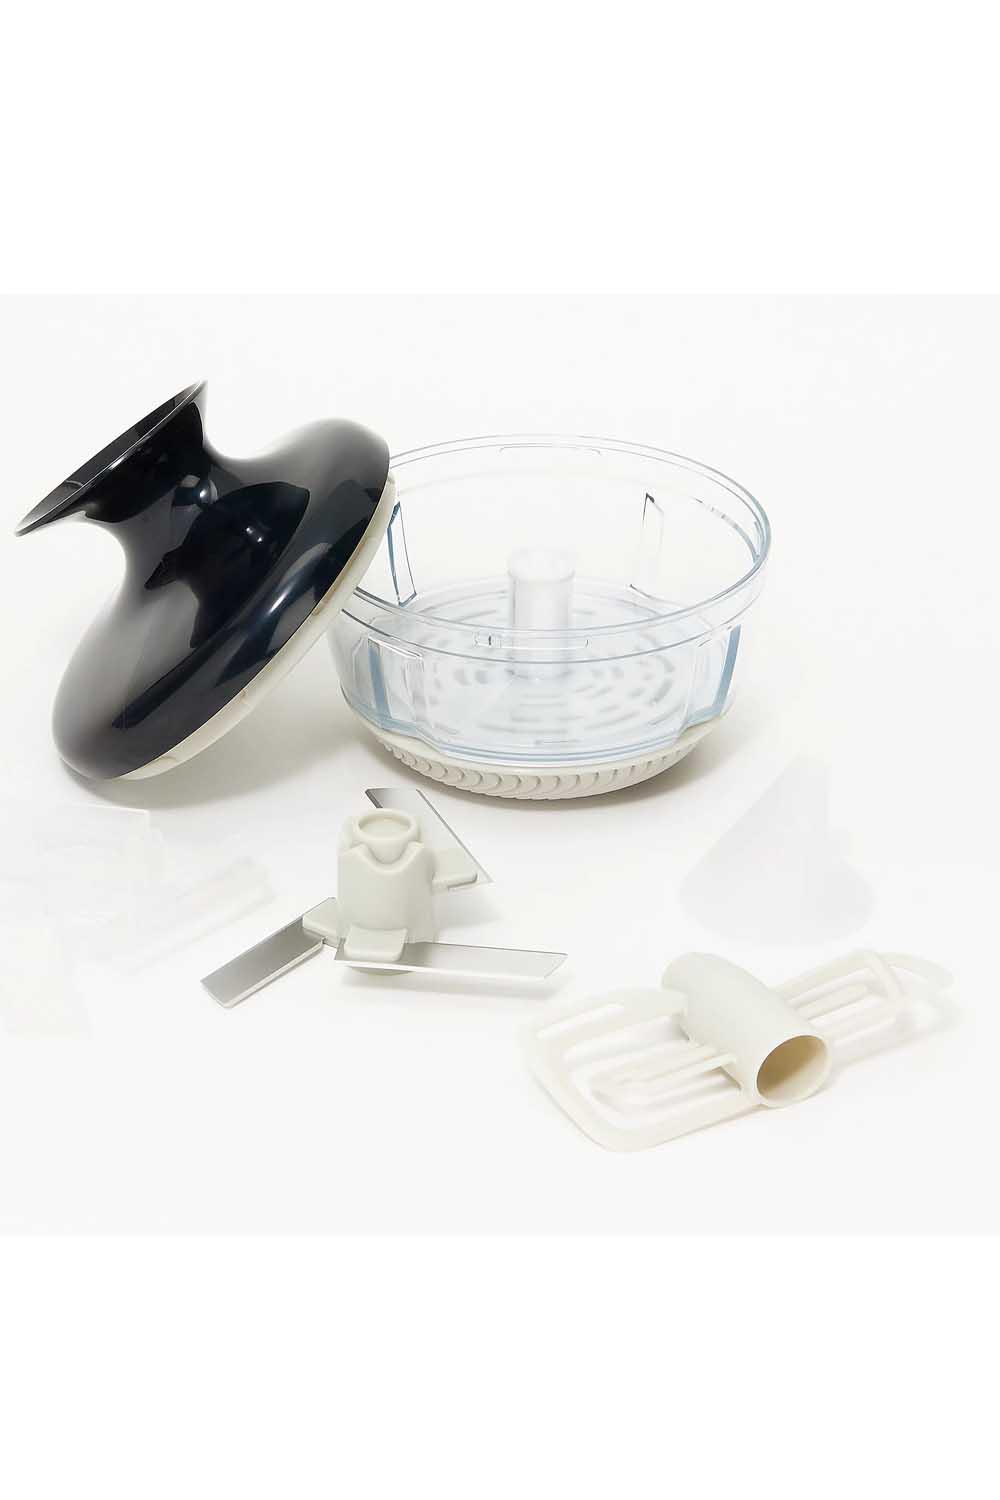 Prepology Rechargeable Mini Chopper w/ Extra Cups